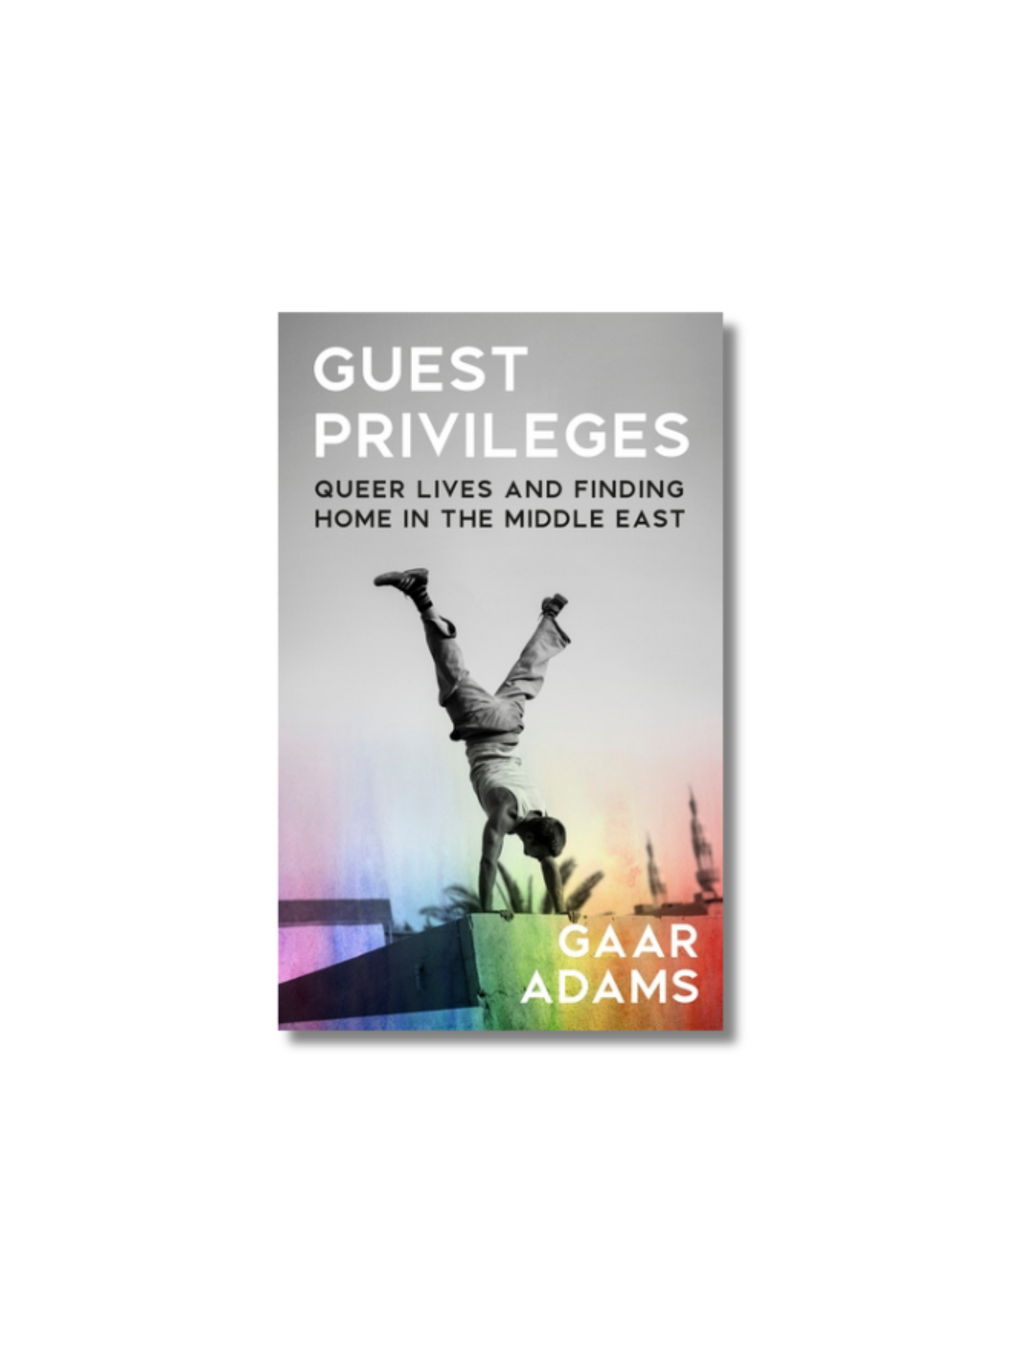 Guest Privileges: Queer Lives and Finding Home in the Middle East